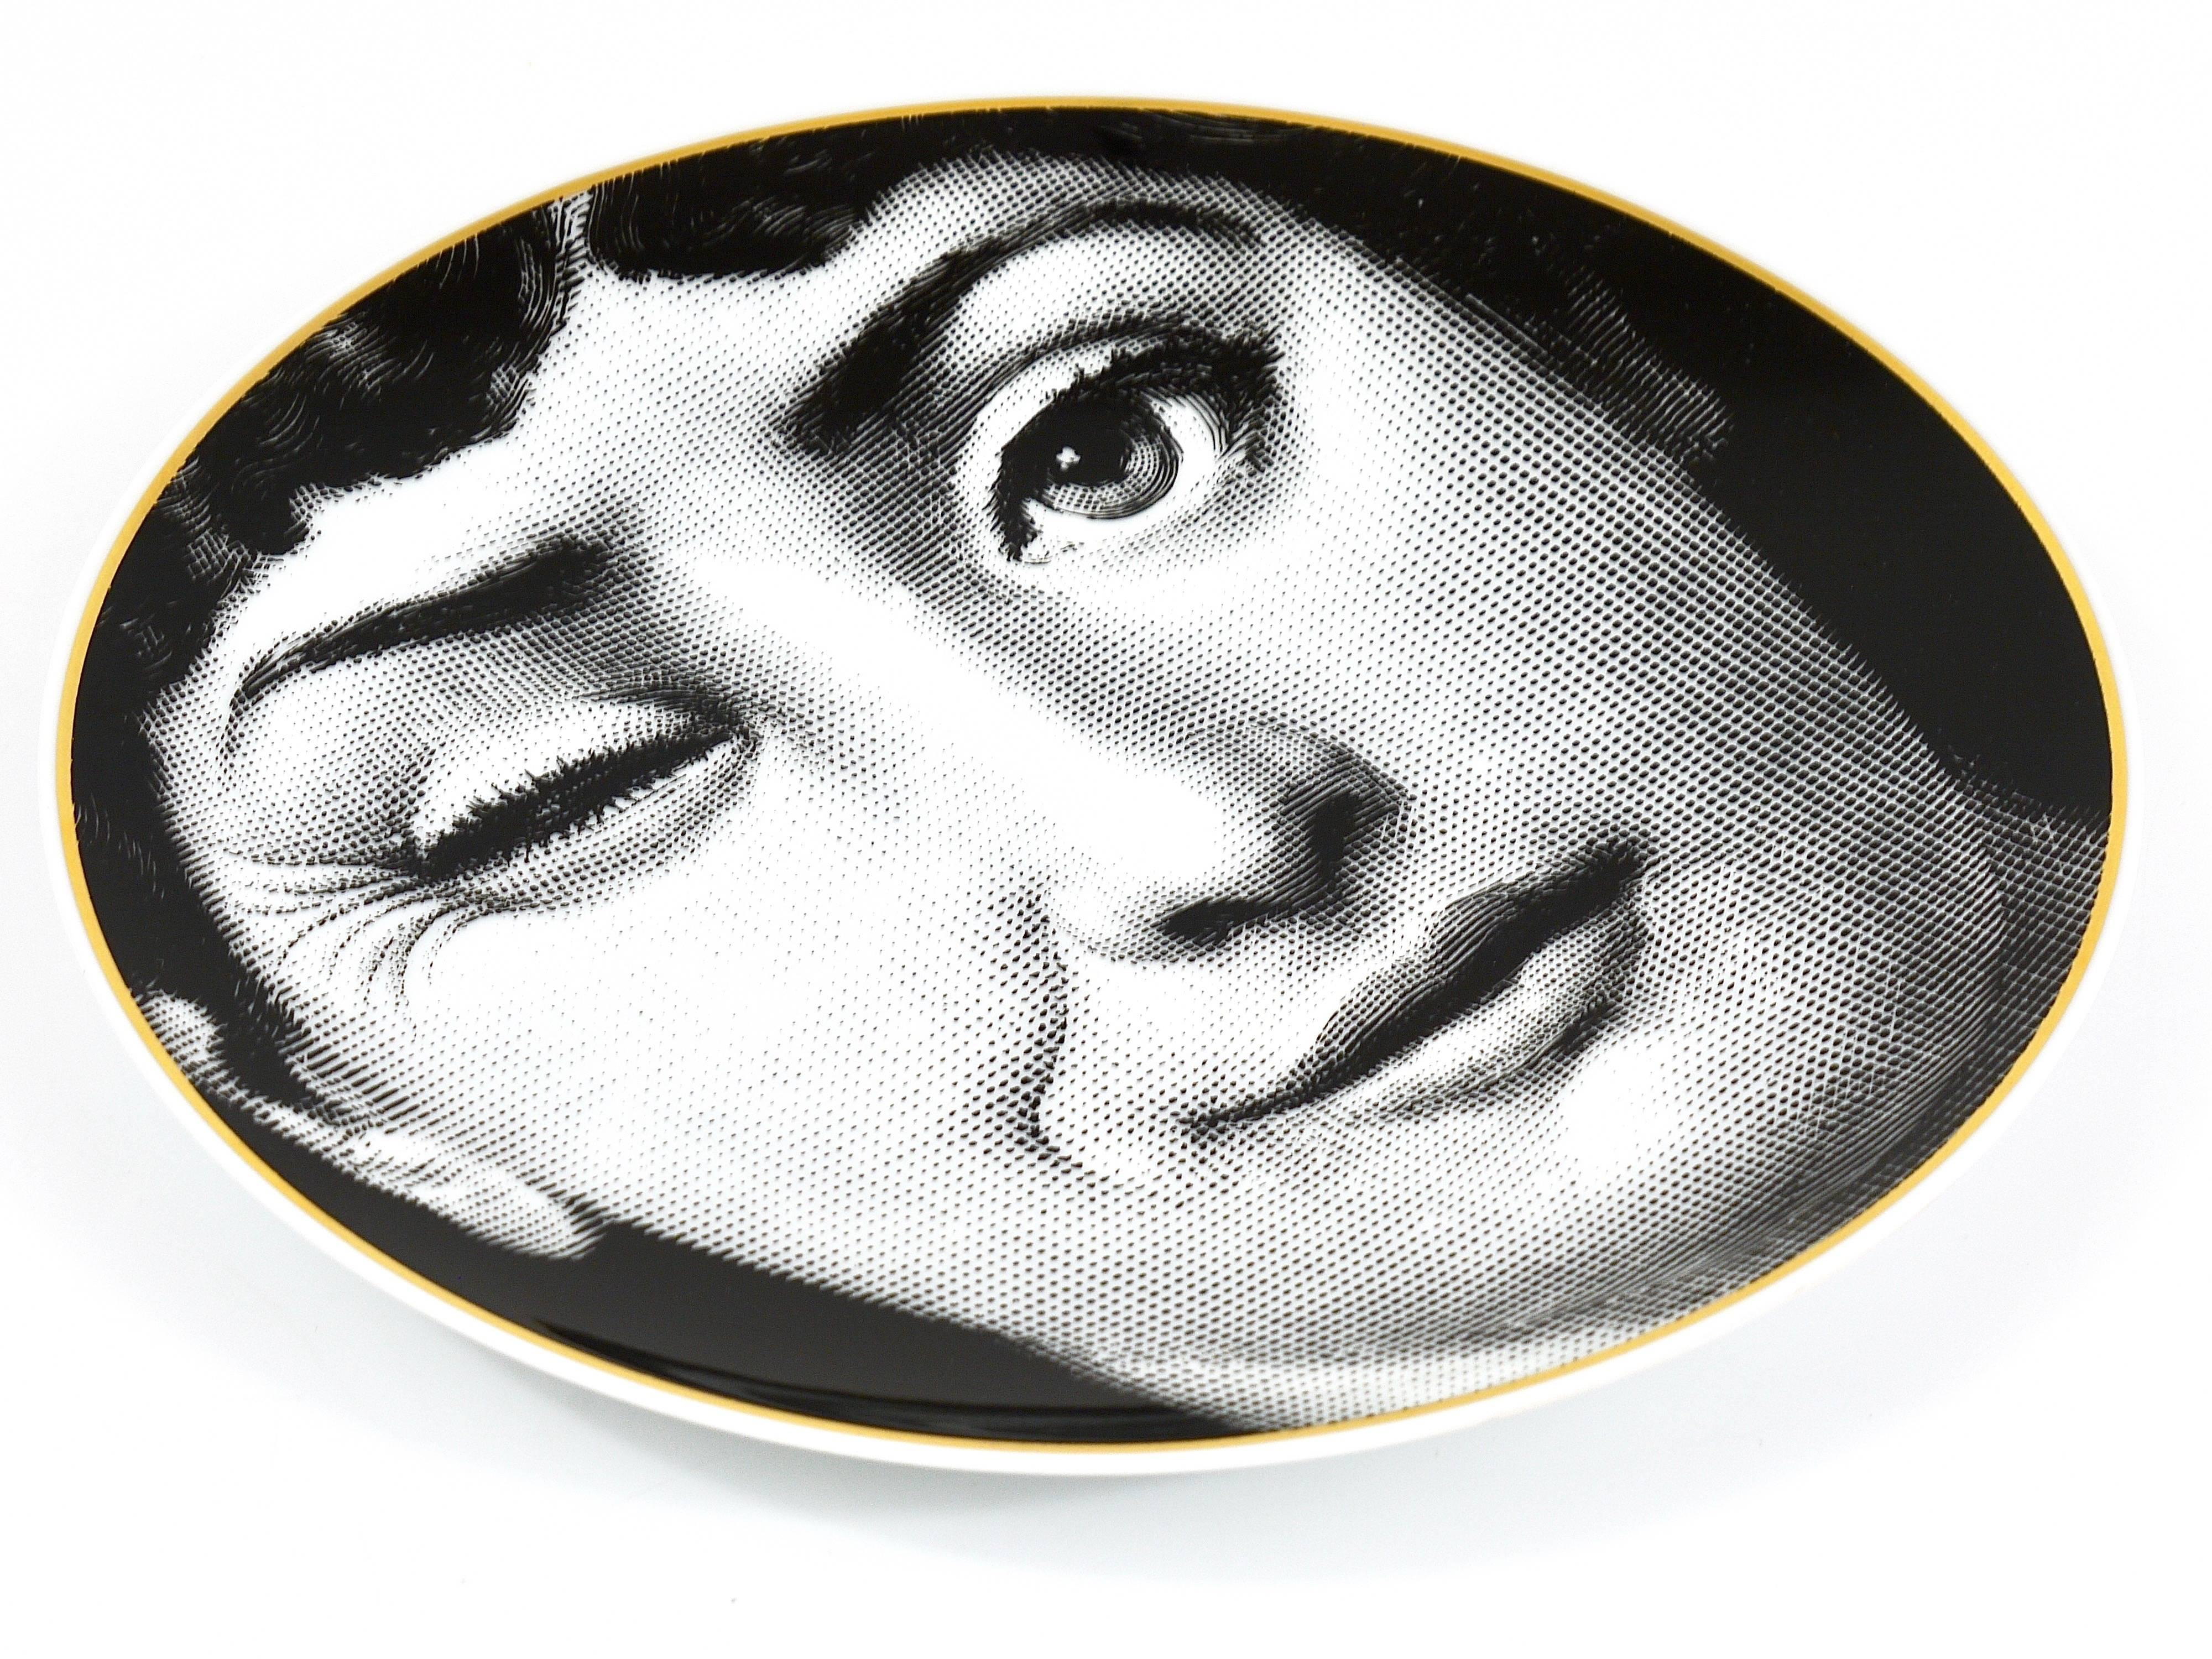 A gold-rimmed black and white collectors plate from the series 